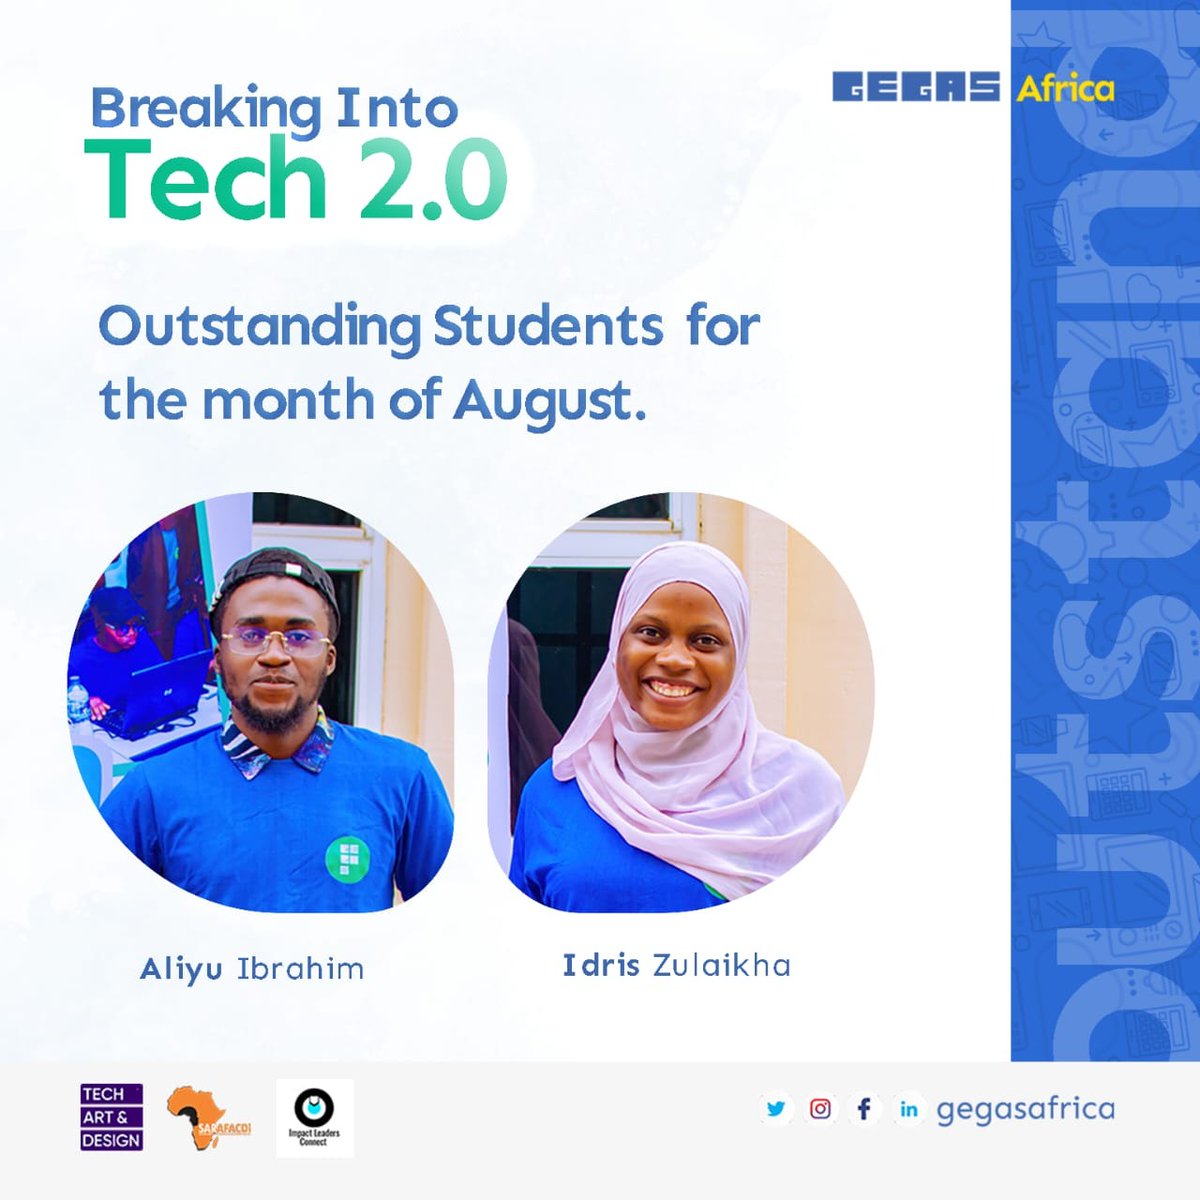 Congratulations to our two most outstanding students in the month of August, Aliyu Ibrahim and Idris Zulaikha
Your progress embodies the core values of our enterprise! Keep up the excellent work!

#getEducatedGetASkill #SDG4 #SDG8
#breakingIntoTech
#decentWork #employability